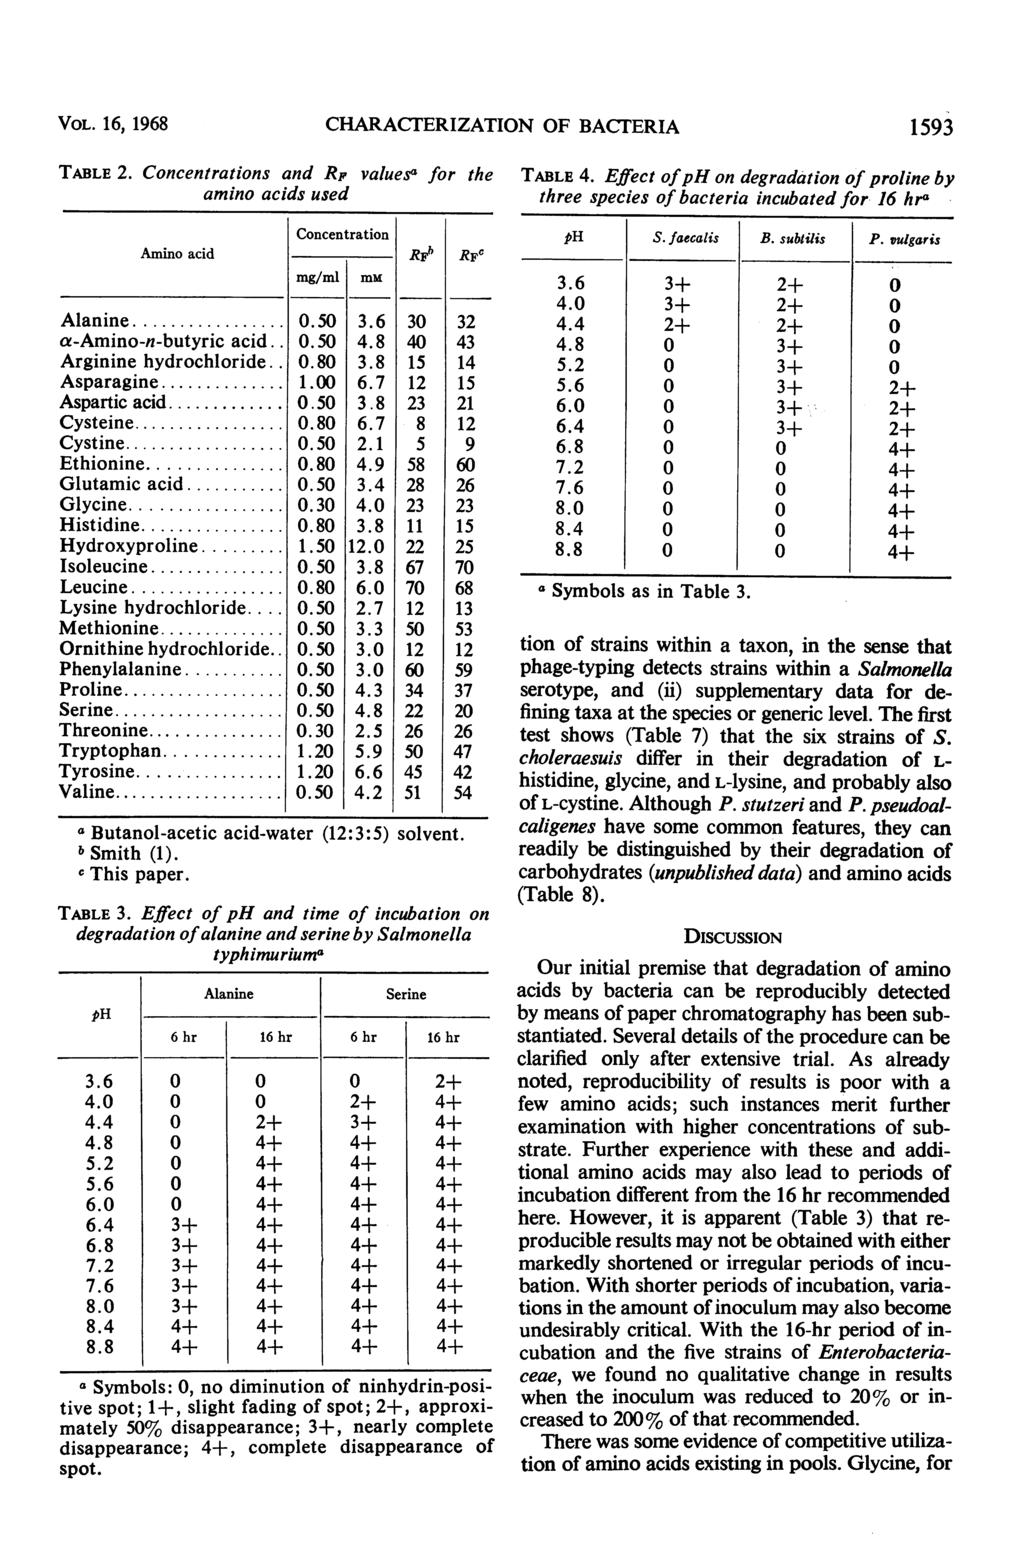 VoL. 16, 1968 TABLE 2. Concentrations and RF valuesa for the amino acids used Concentration Amino acid RF} RFC mg/ml mm Alanine... 0.50 3.6 30 32 a-amino-n-butyric acid.. 0.50 4.